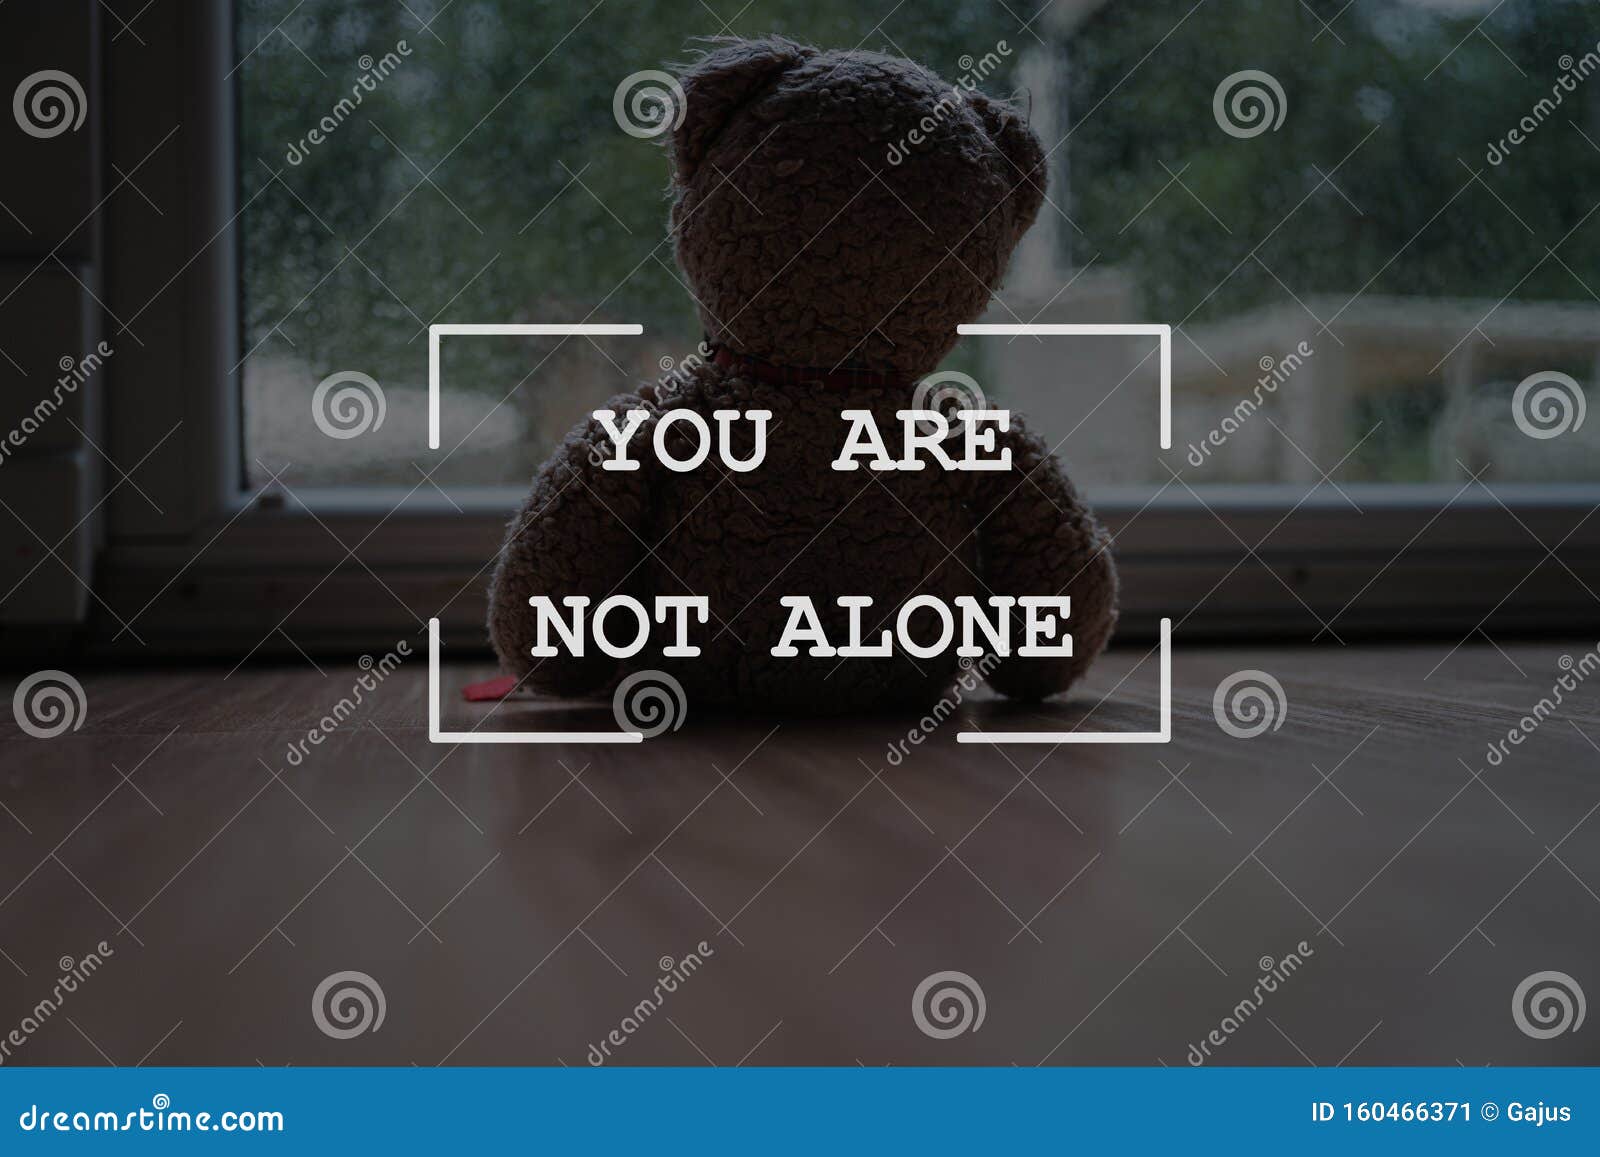 you are not alone sign